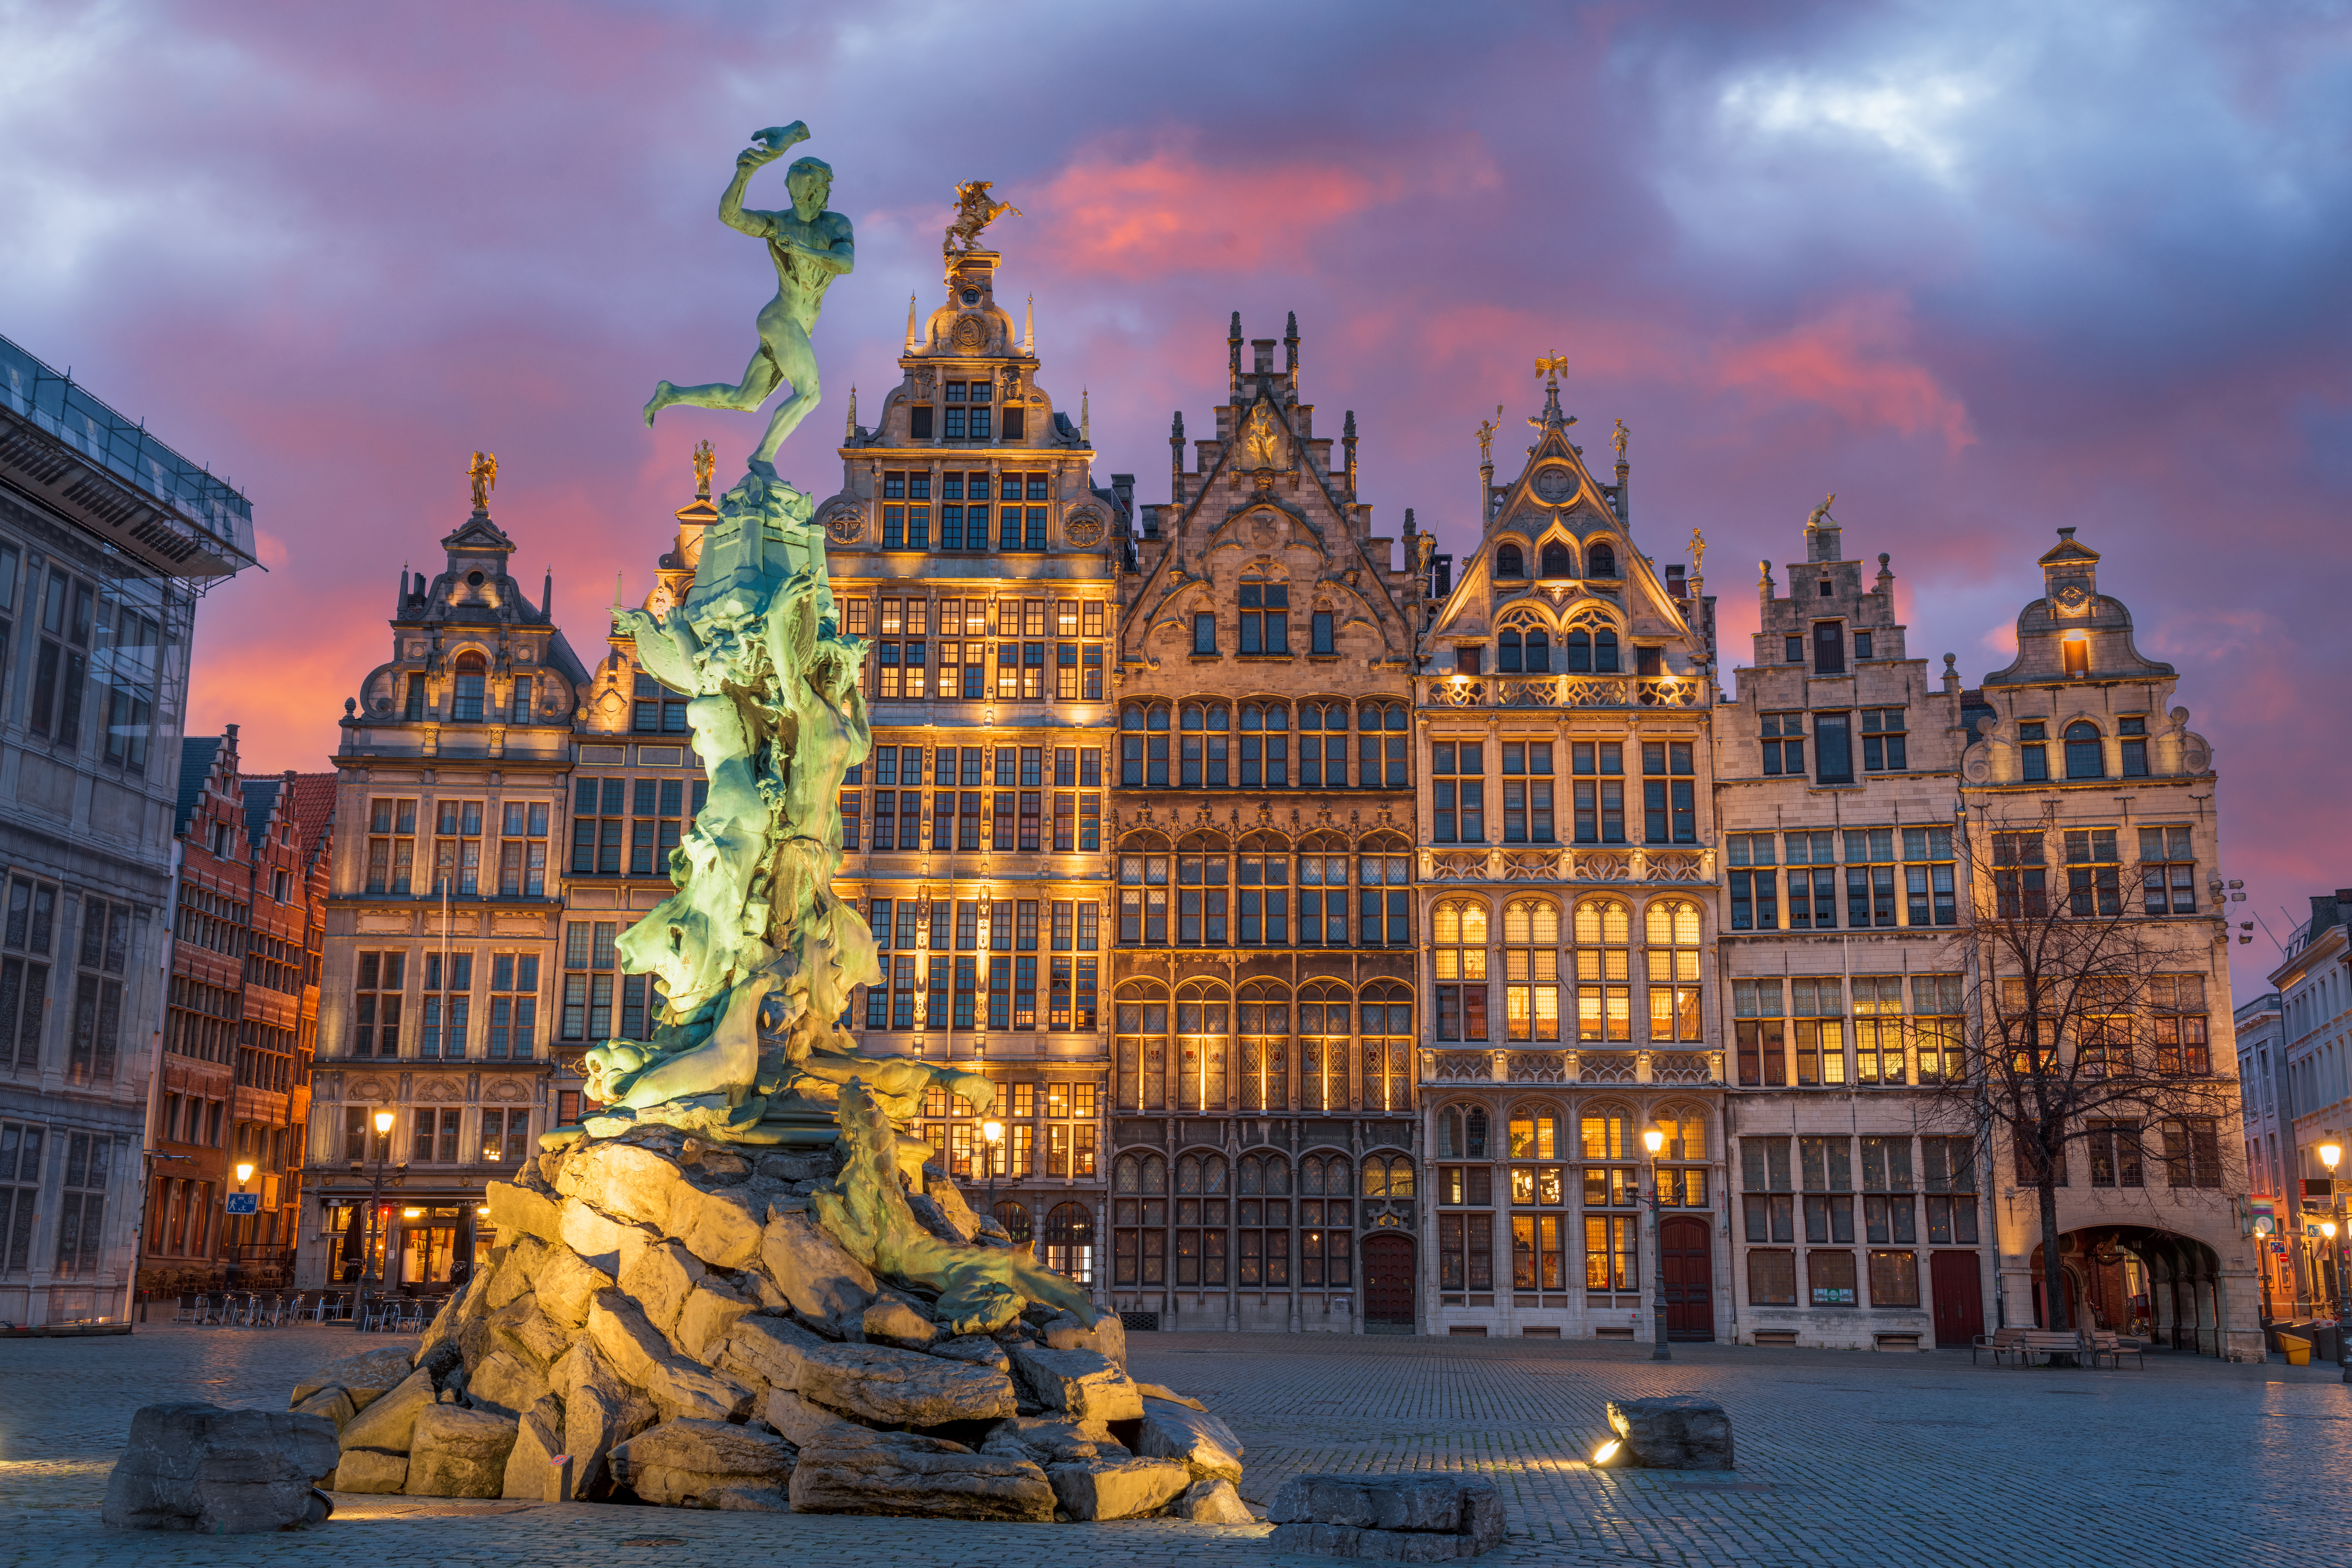 Antwerp is exactly how you would picture a quaint Belgian city